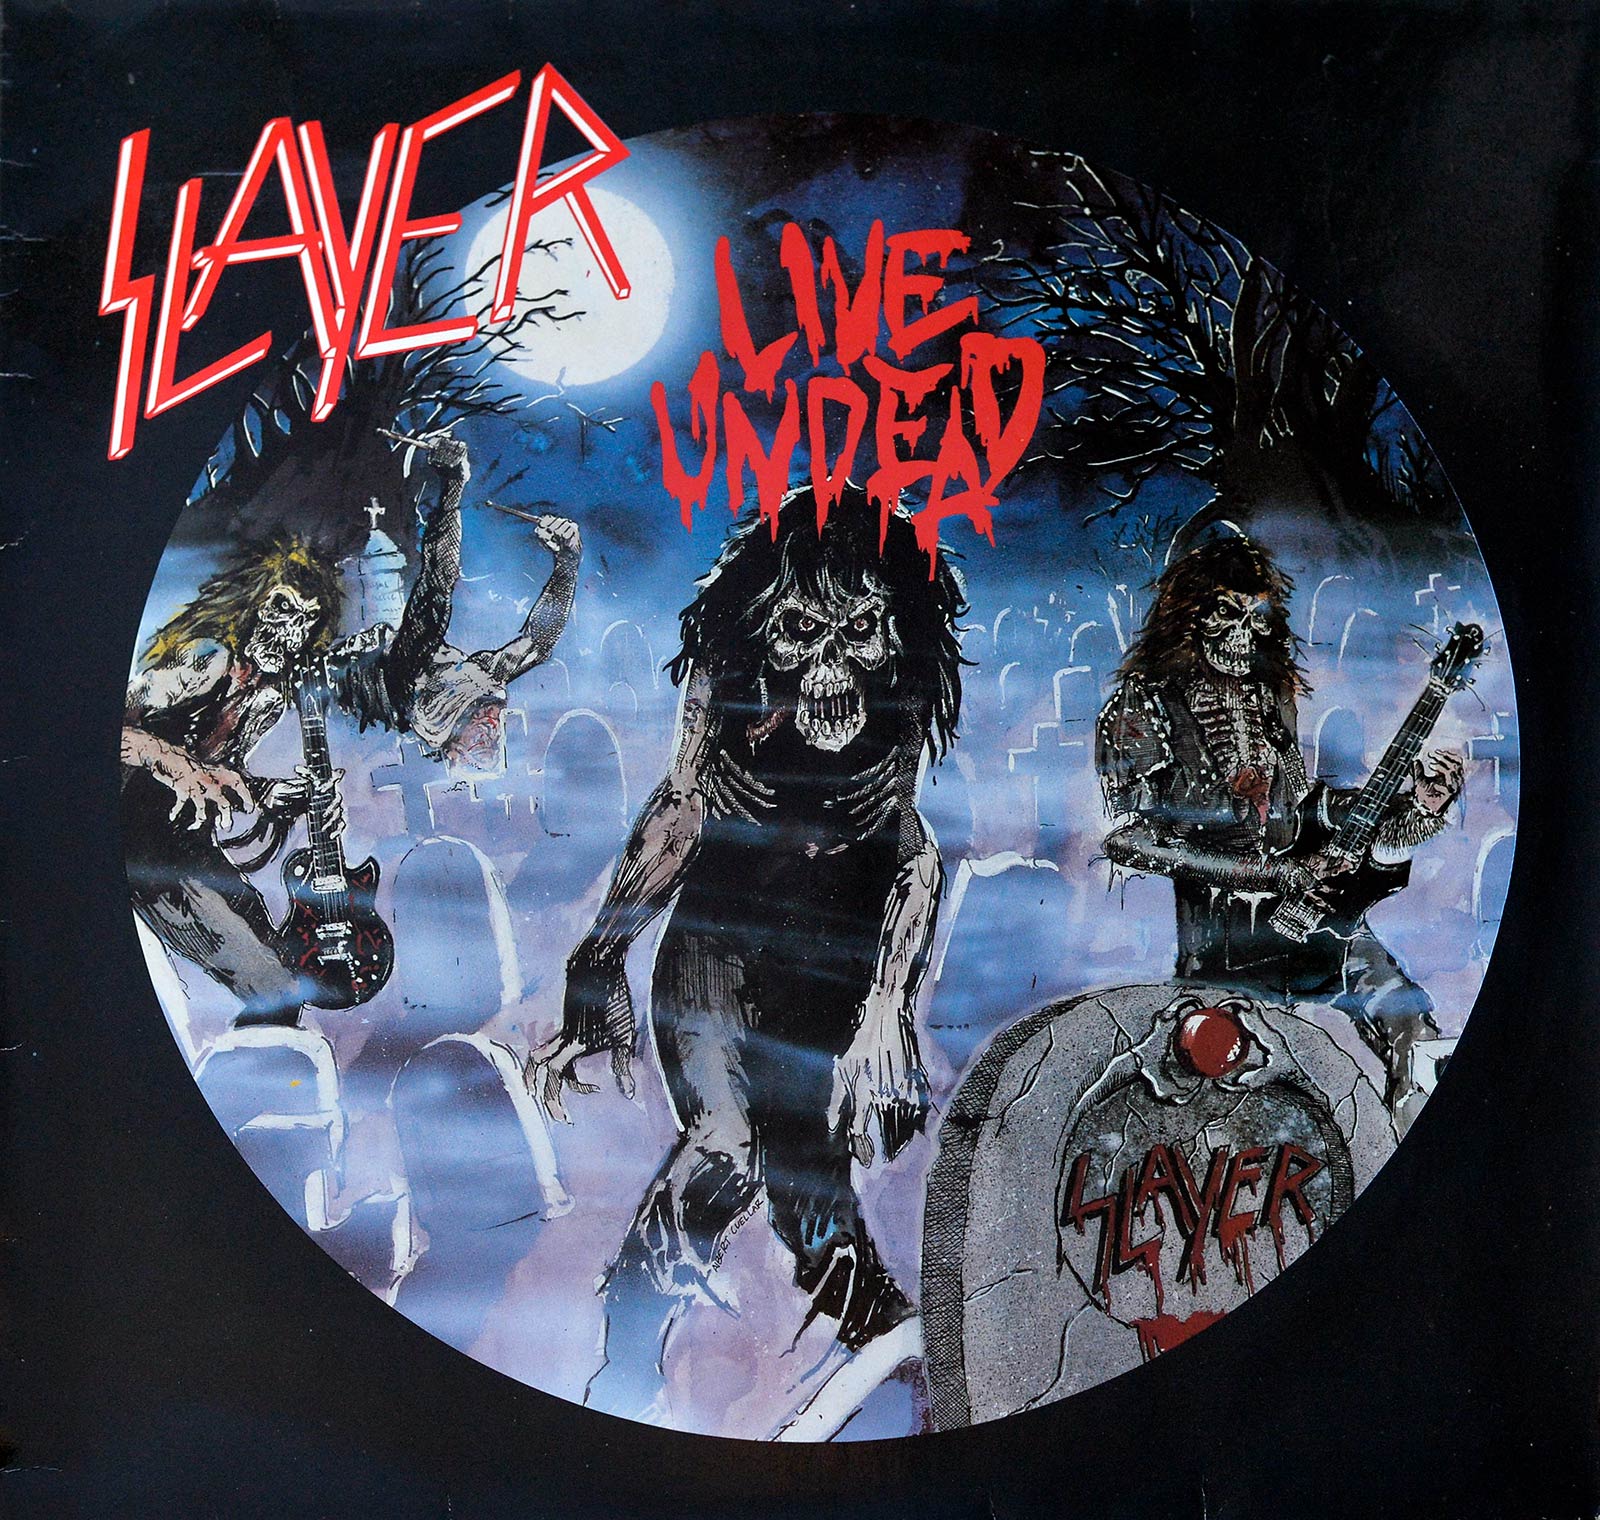 large album front cover photo of: Live Undead by Slayer